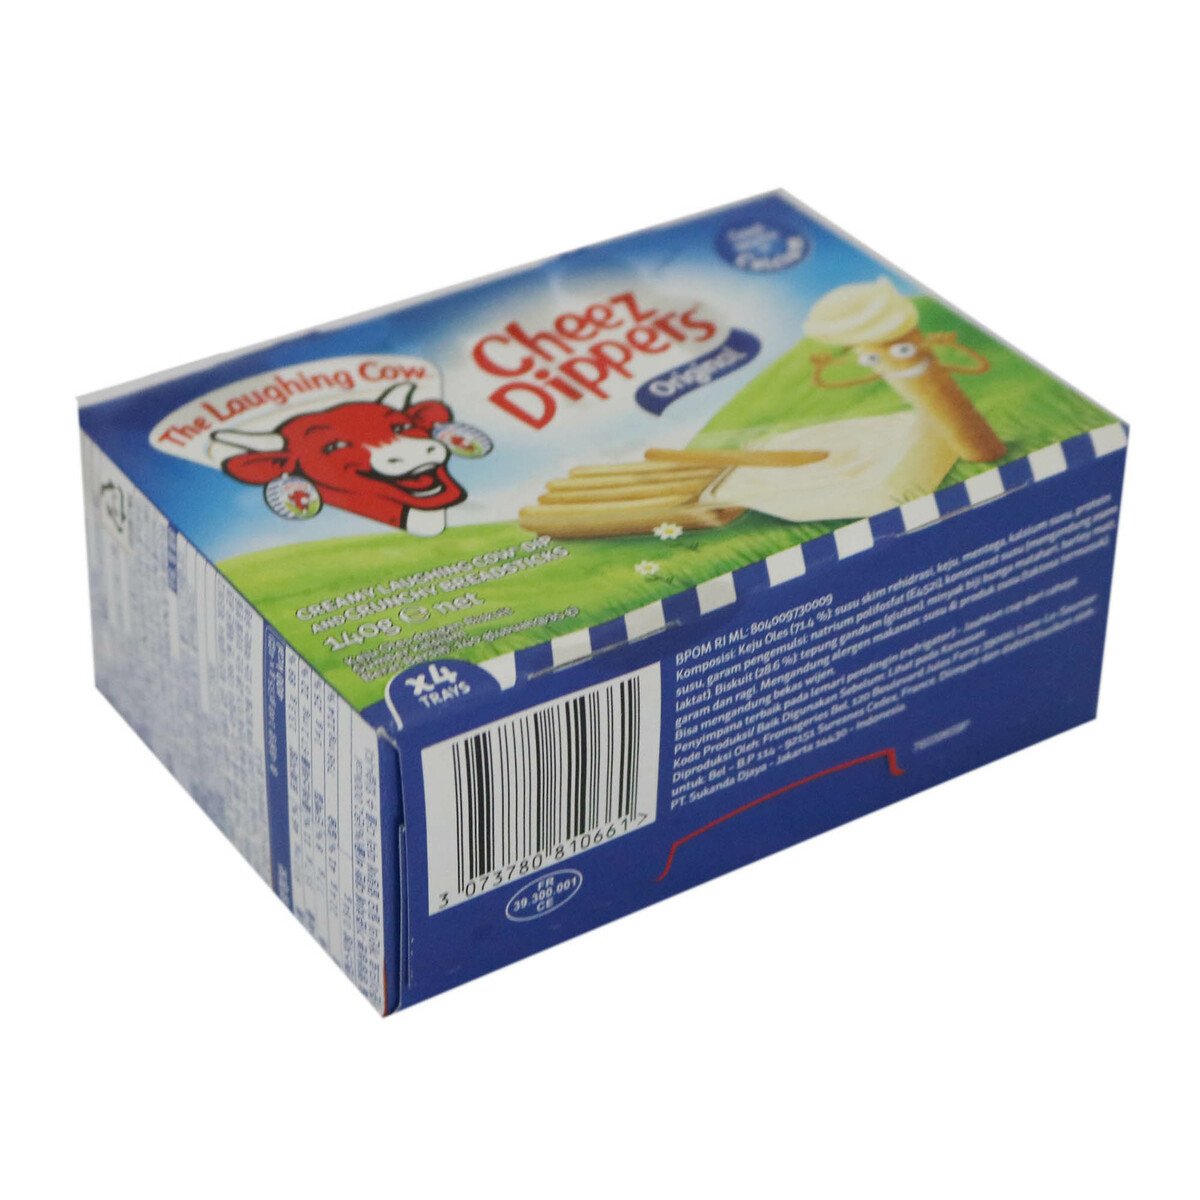 Laughing Cow Cheese Dipper 140g